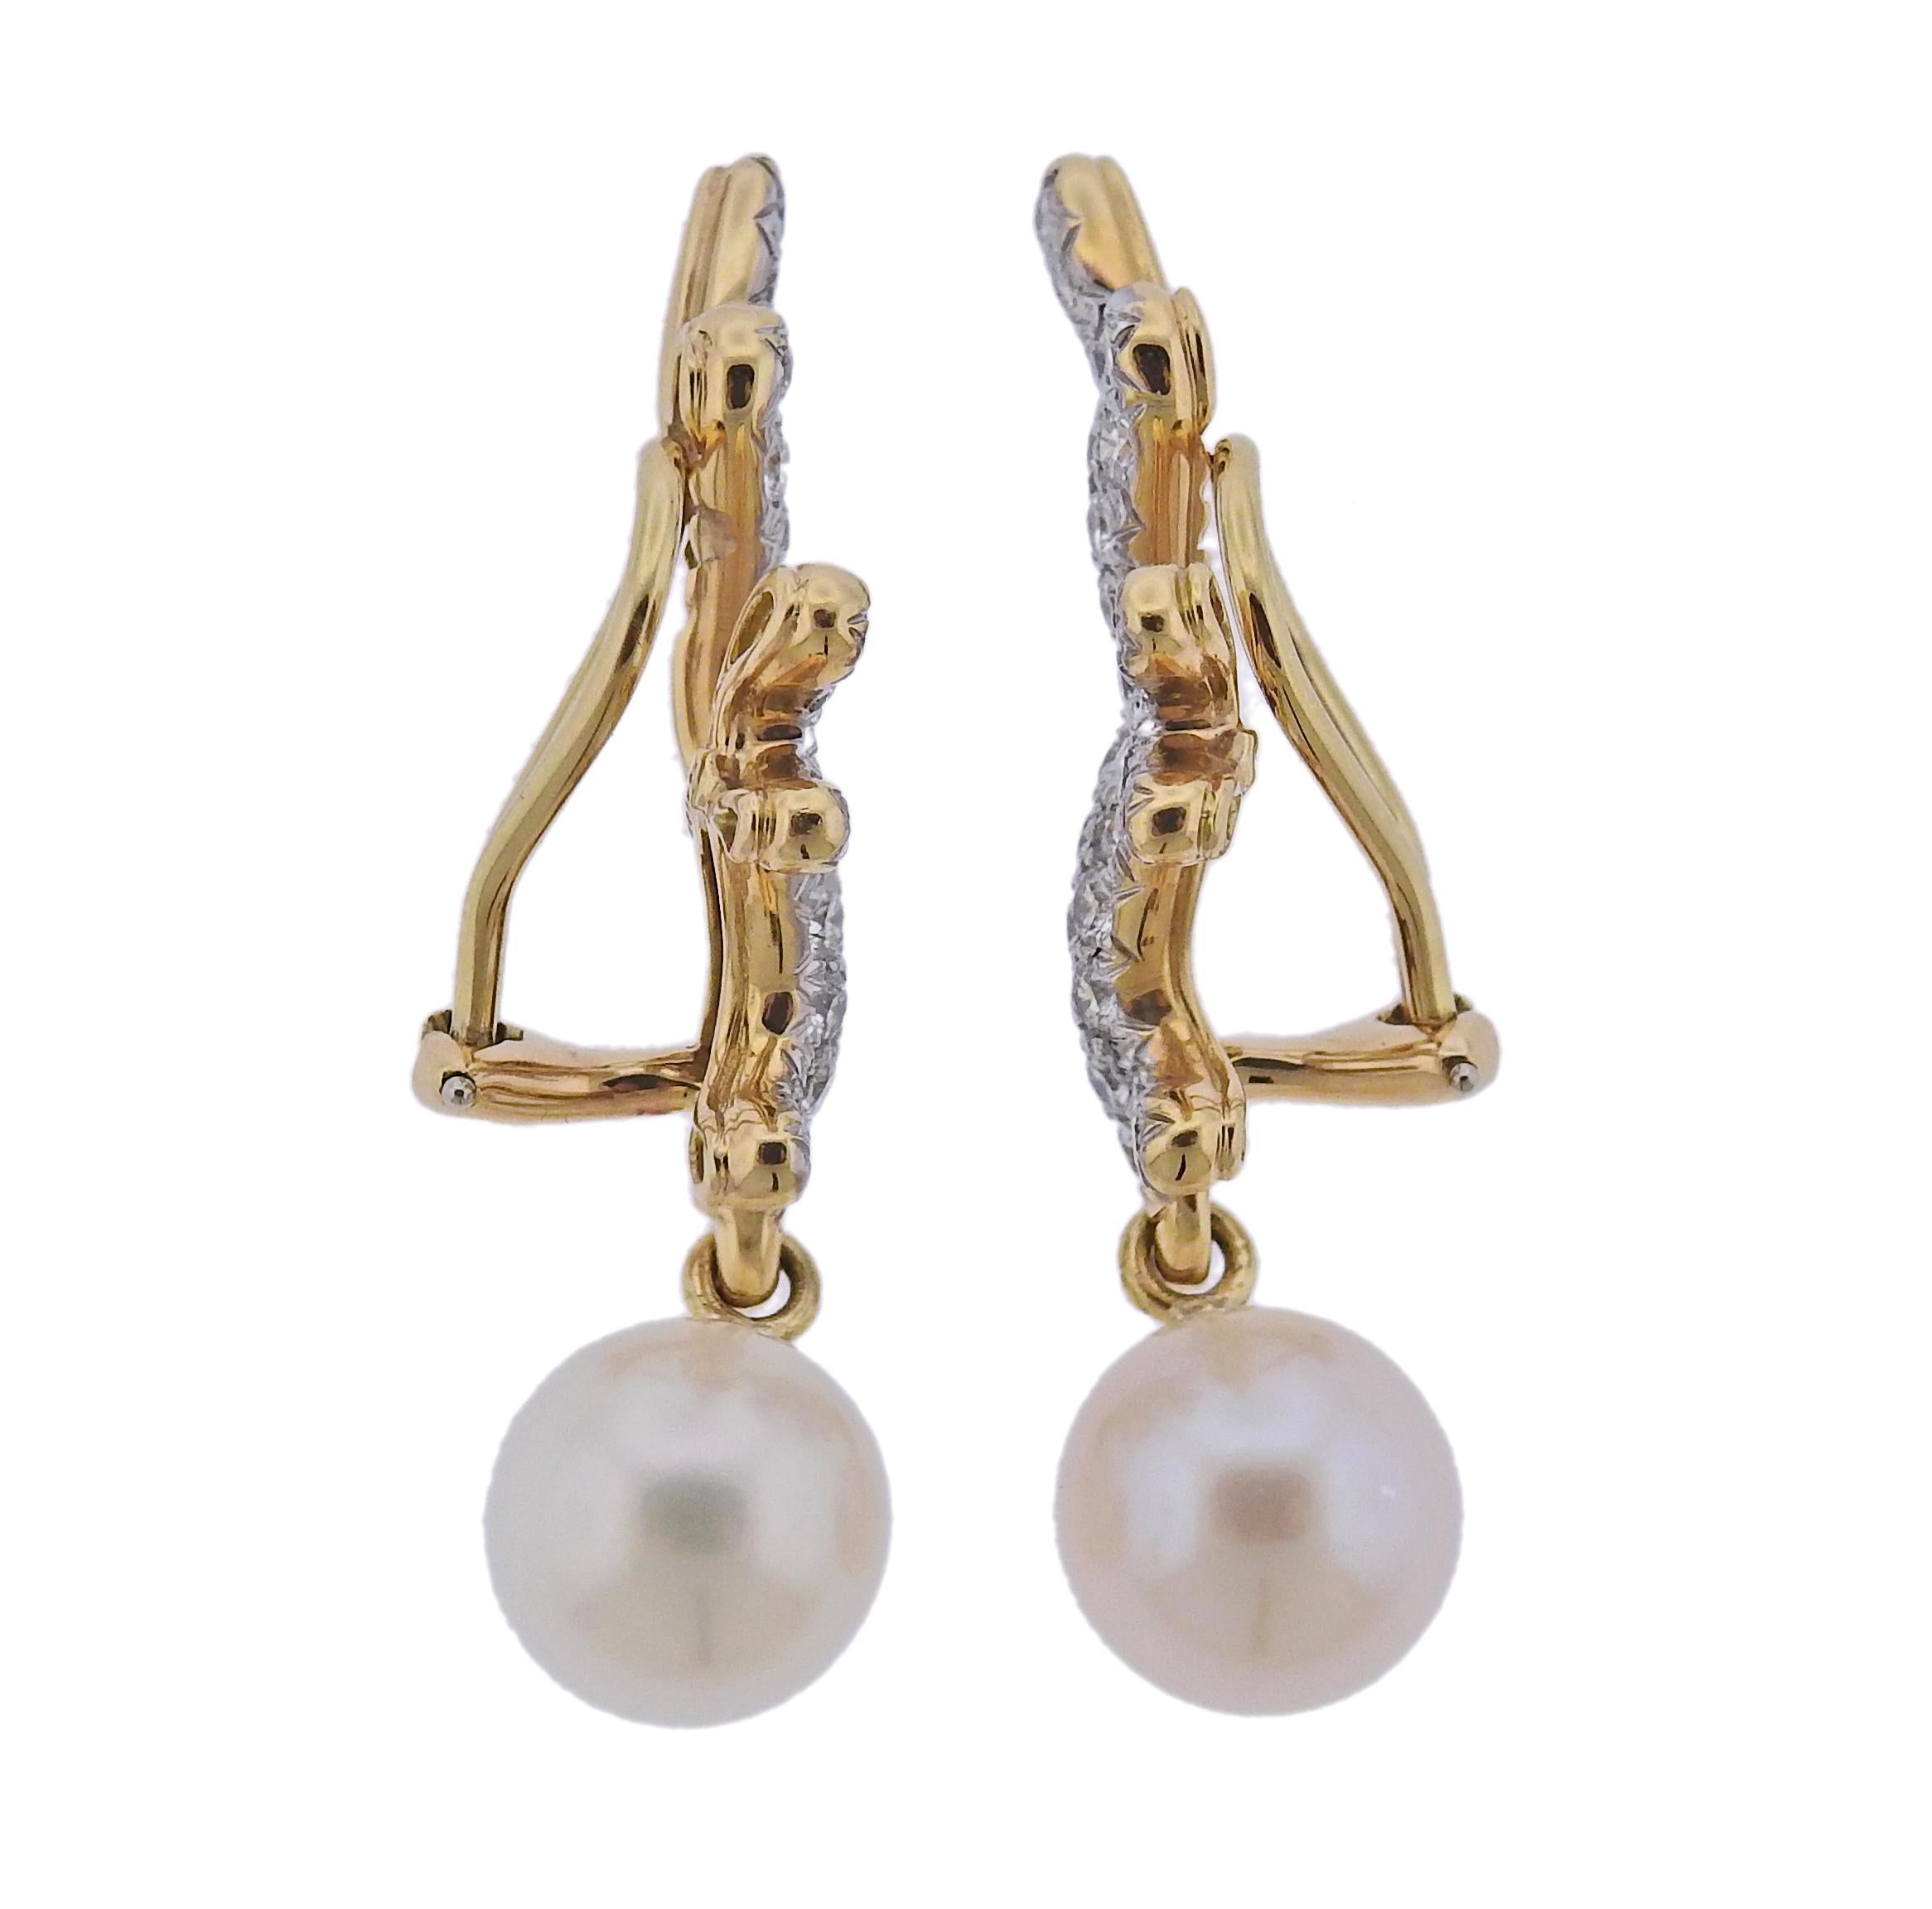 Pair of  18k gold new without tags earrings by Angela Cummings and Assael, with 11mm South Sea pearls and 1.95tw G/VS diamonds. Retail $14500. Come with pouch.  Earrings are 46mm long. Weight - 15.4 grams. Marked: Assael, Angela Cummings, 750.